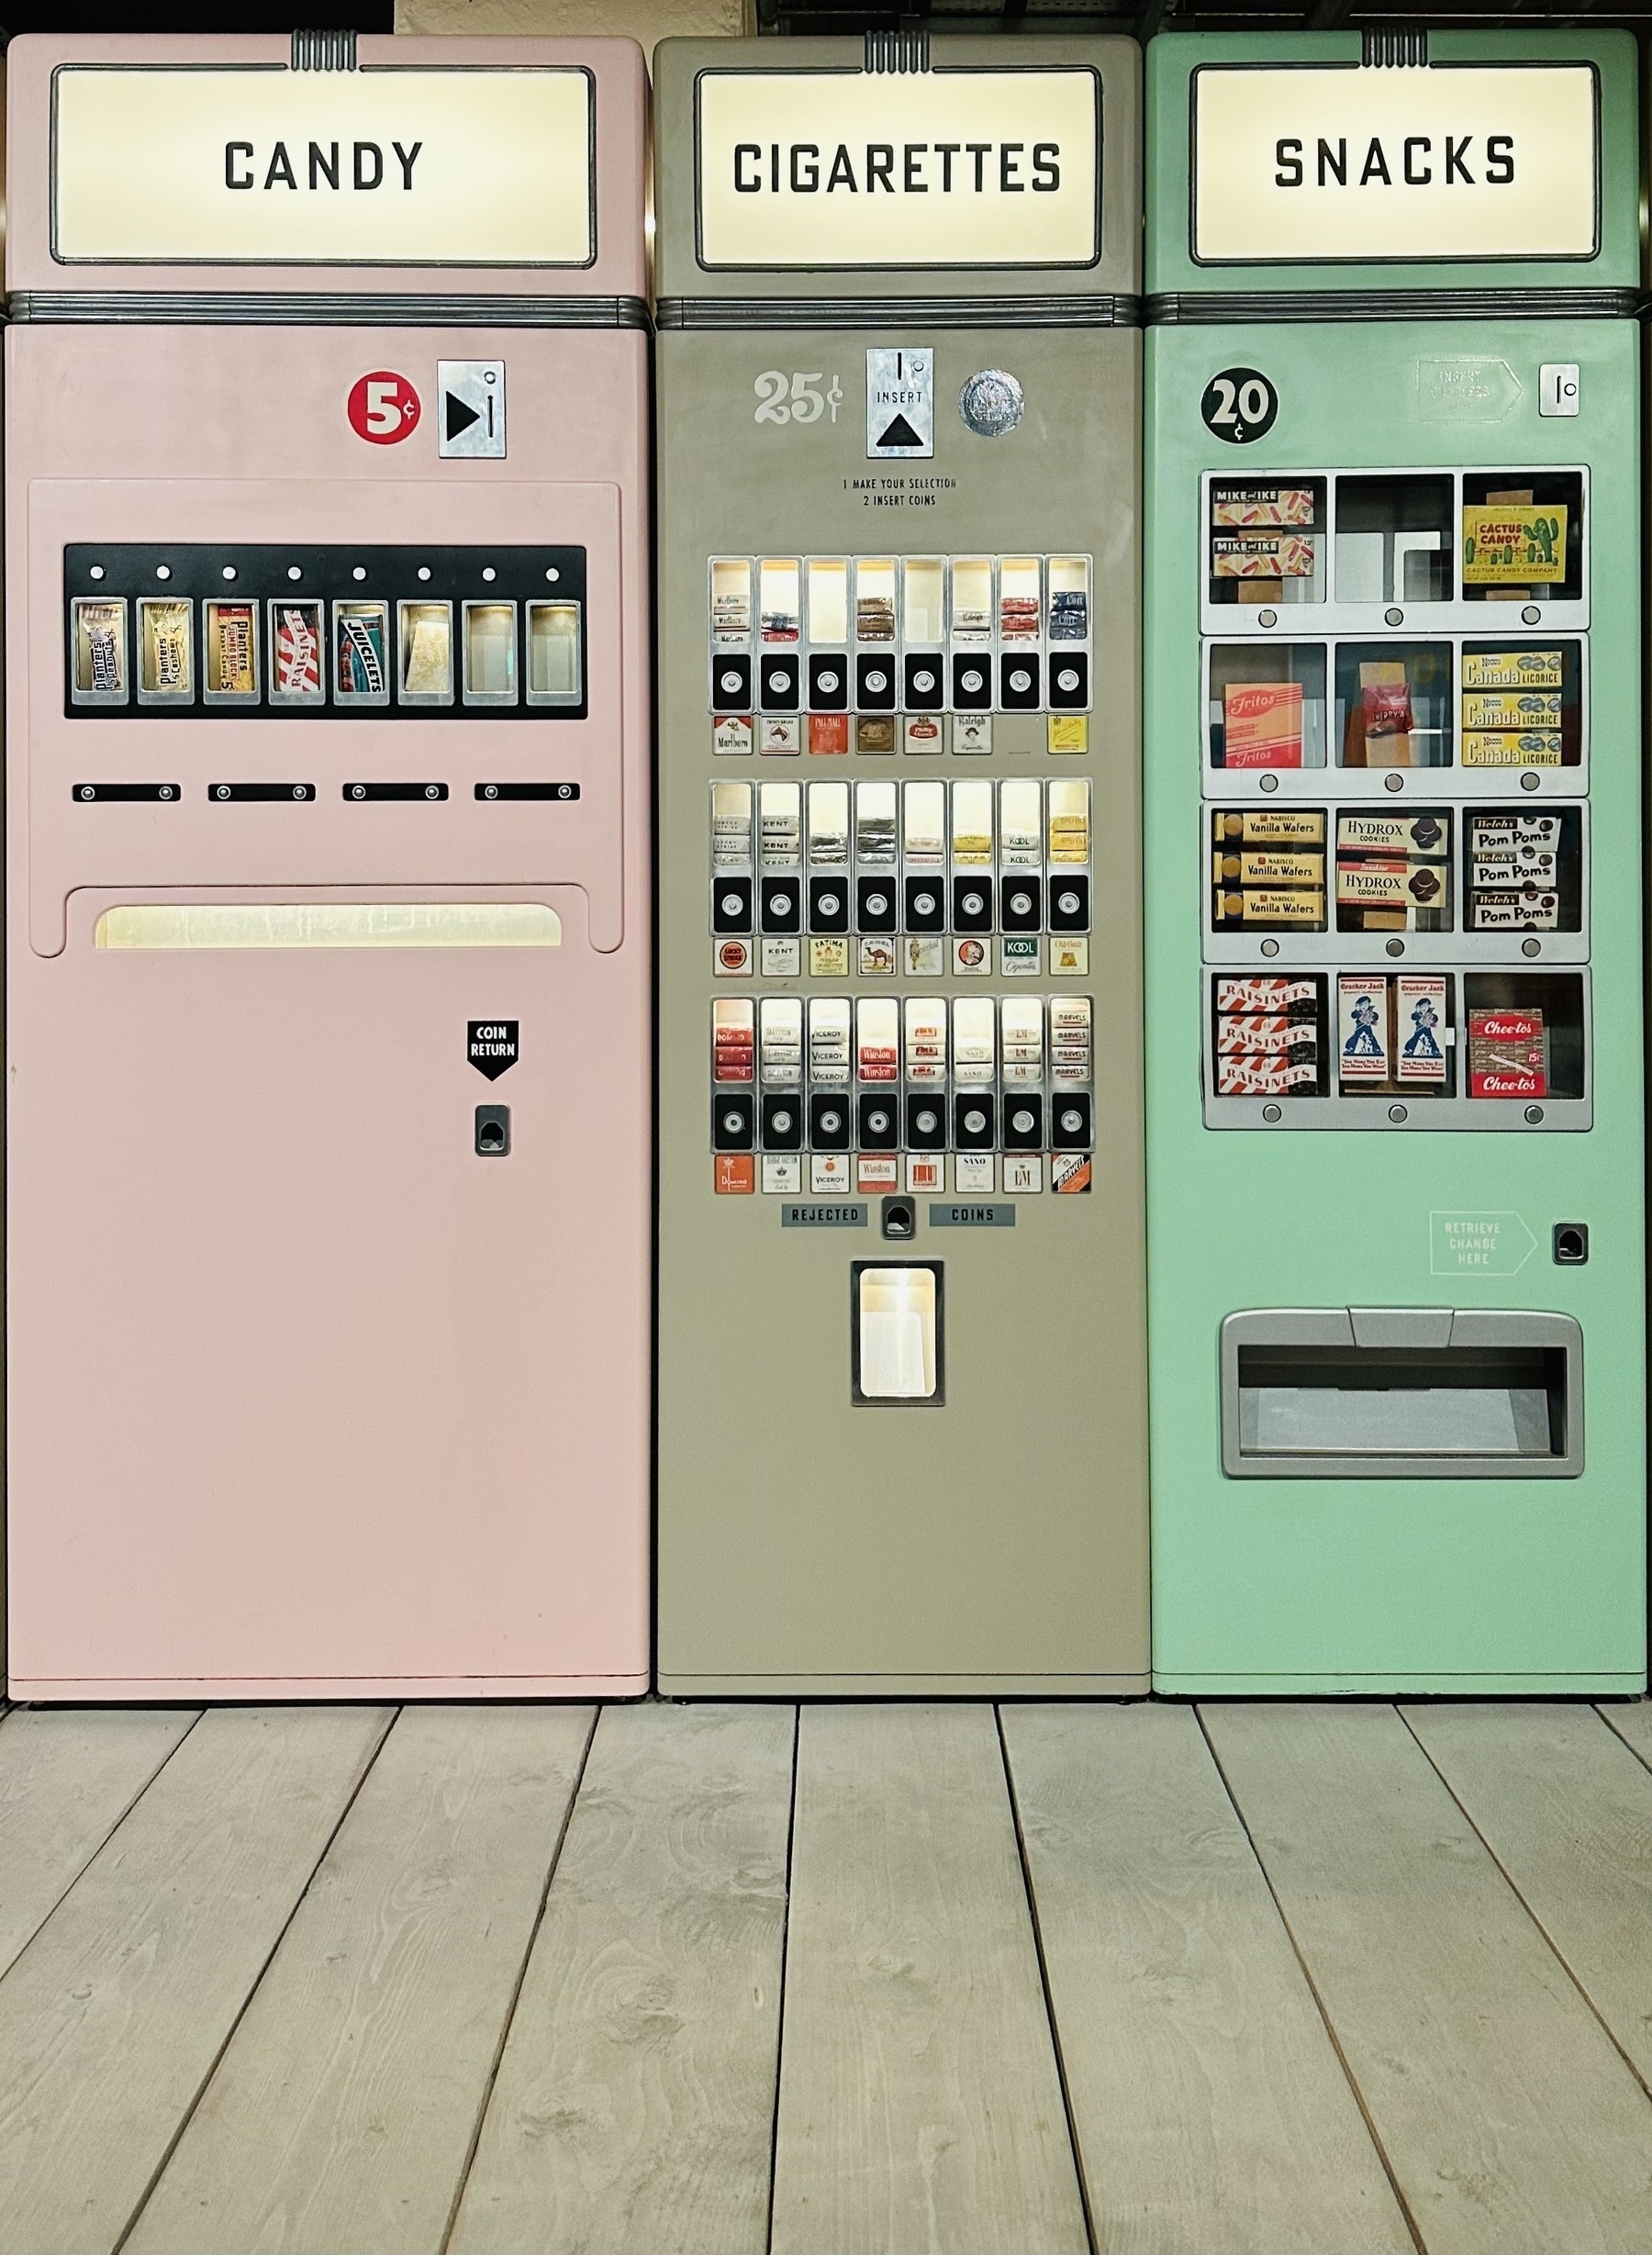 Colourful 50s style vending machines selling candy, cigarettes, and snacks. From the film Asteroid City.